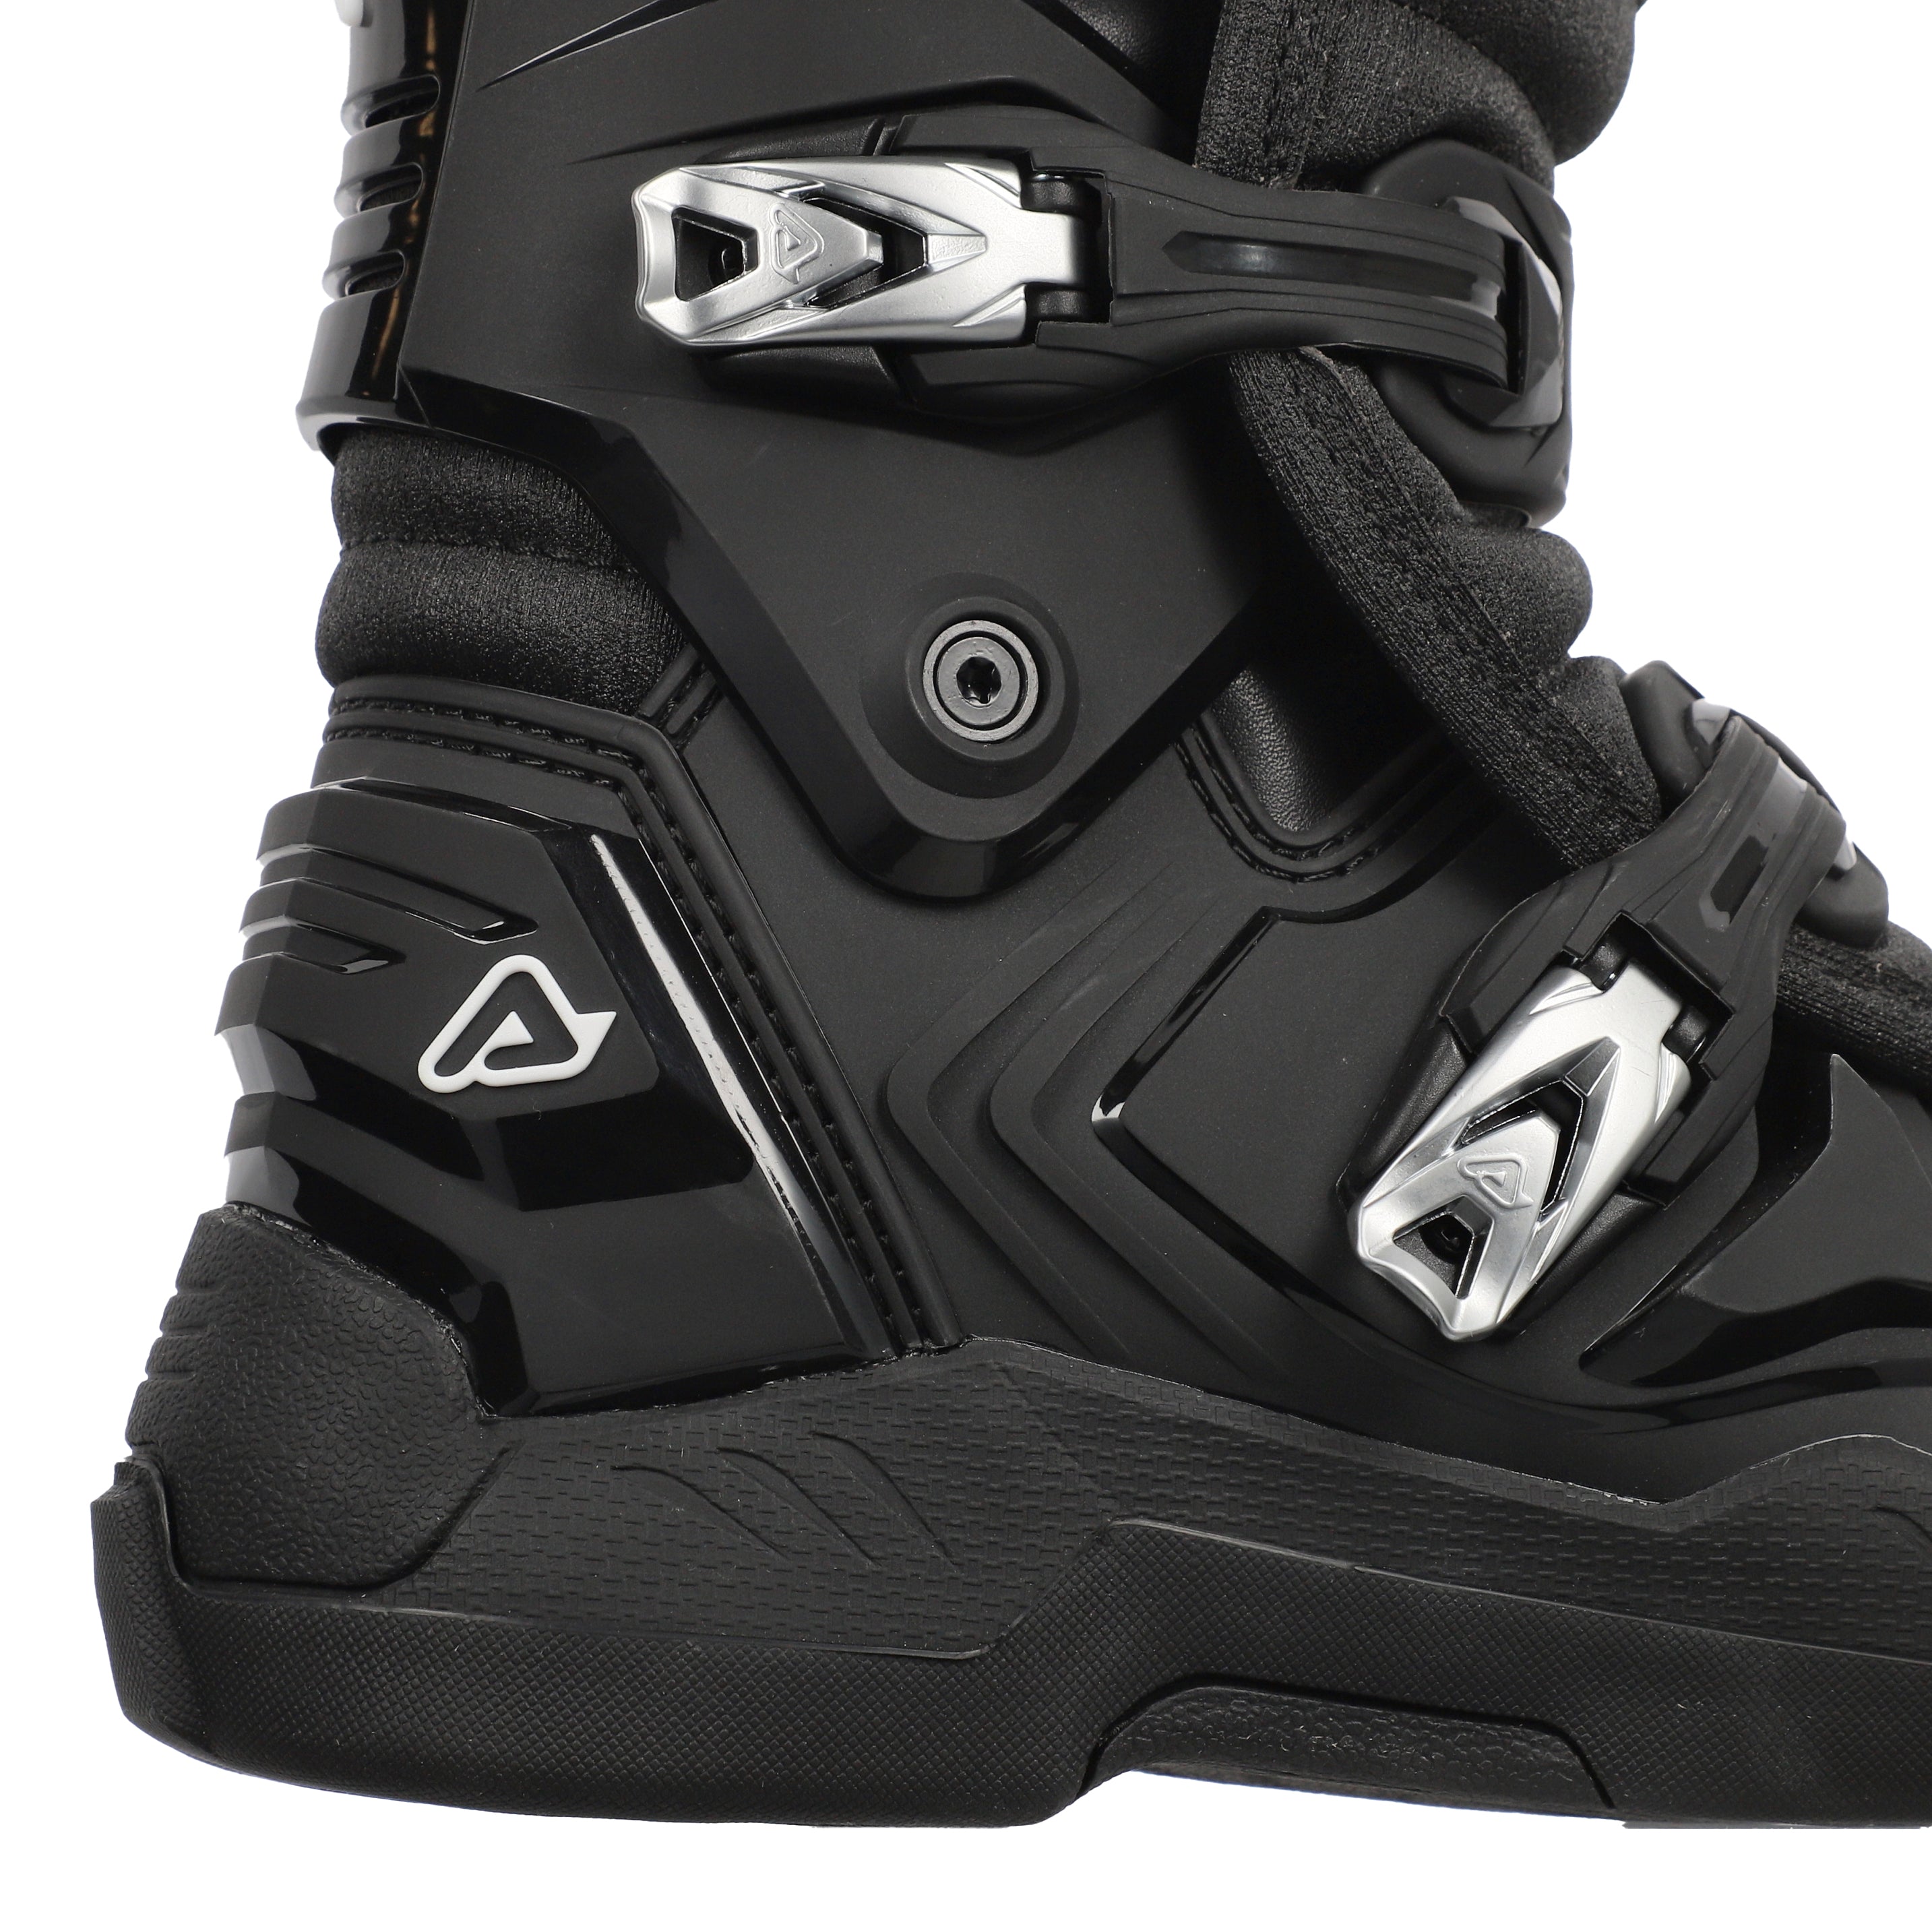 Acerbis Whoops MX Boots Black/White